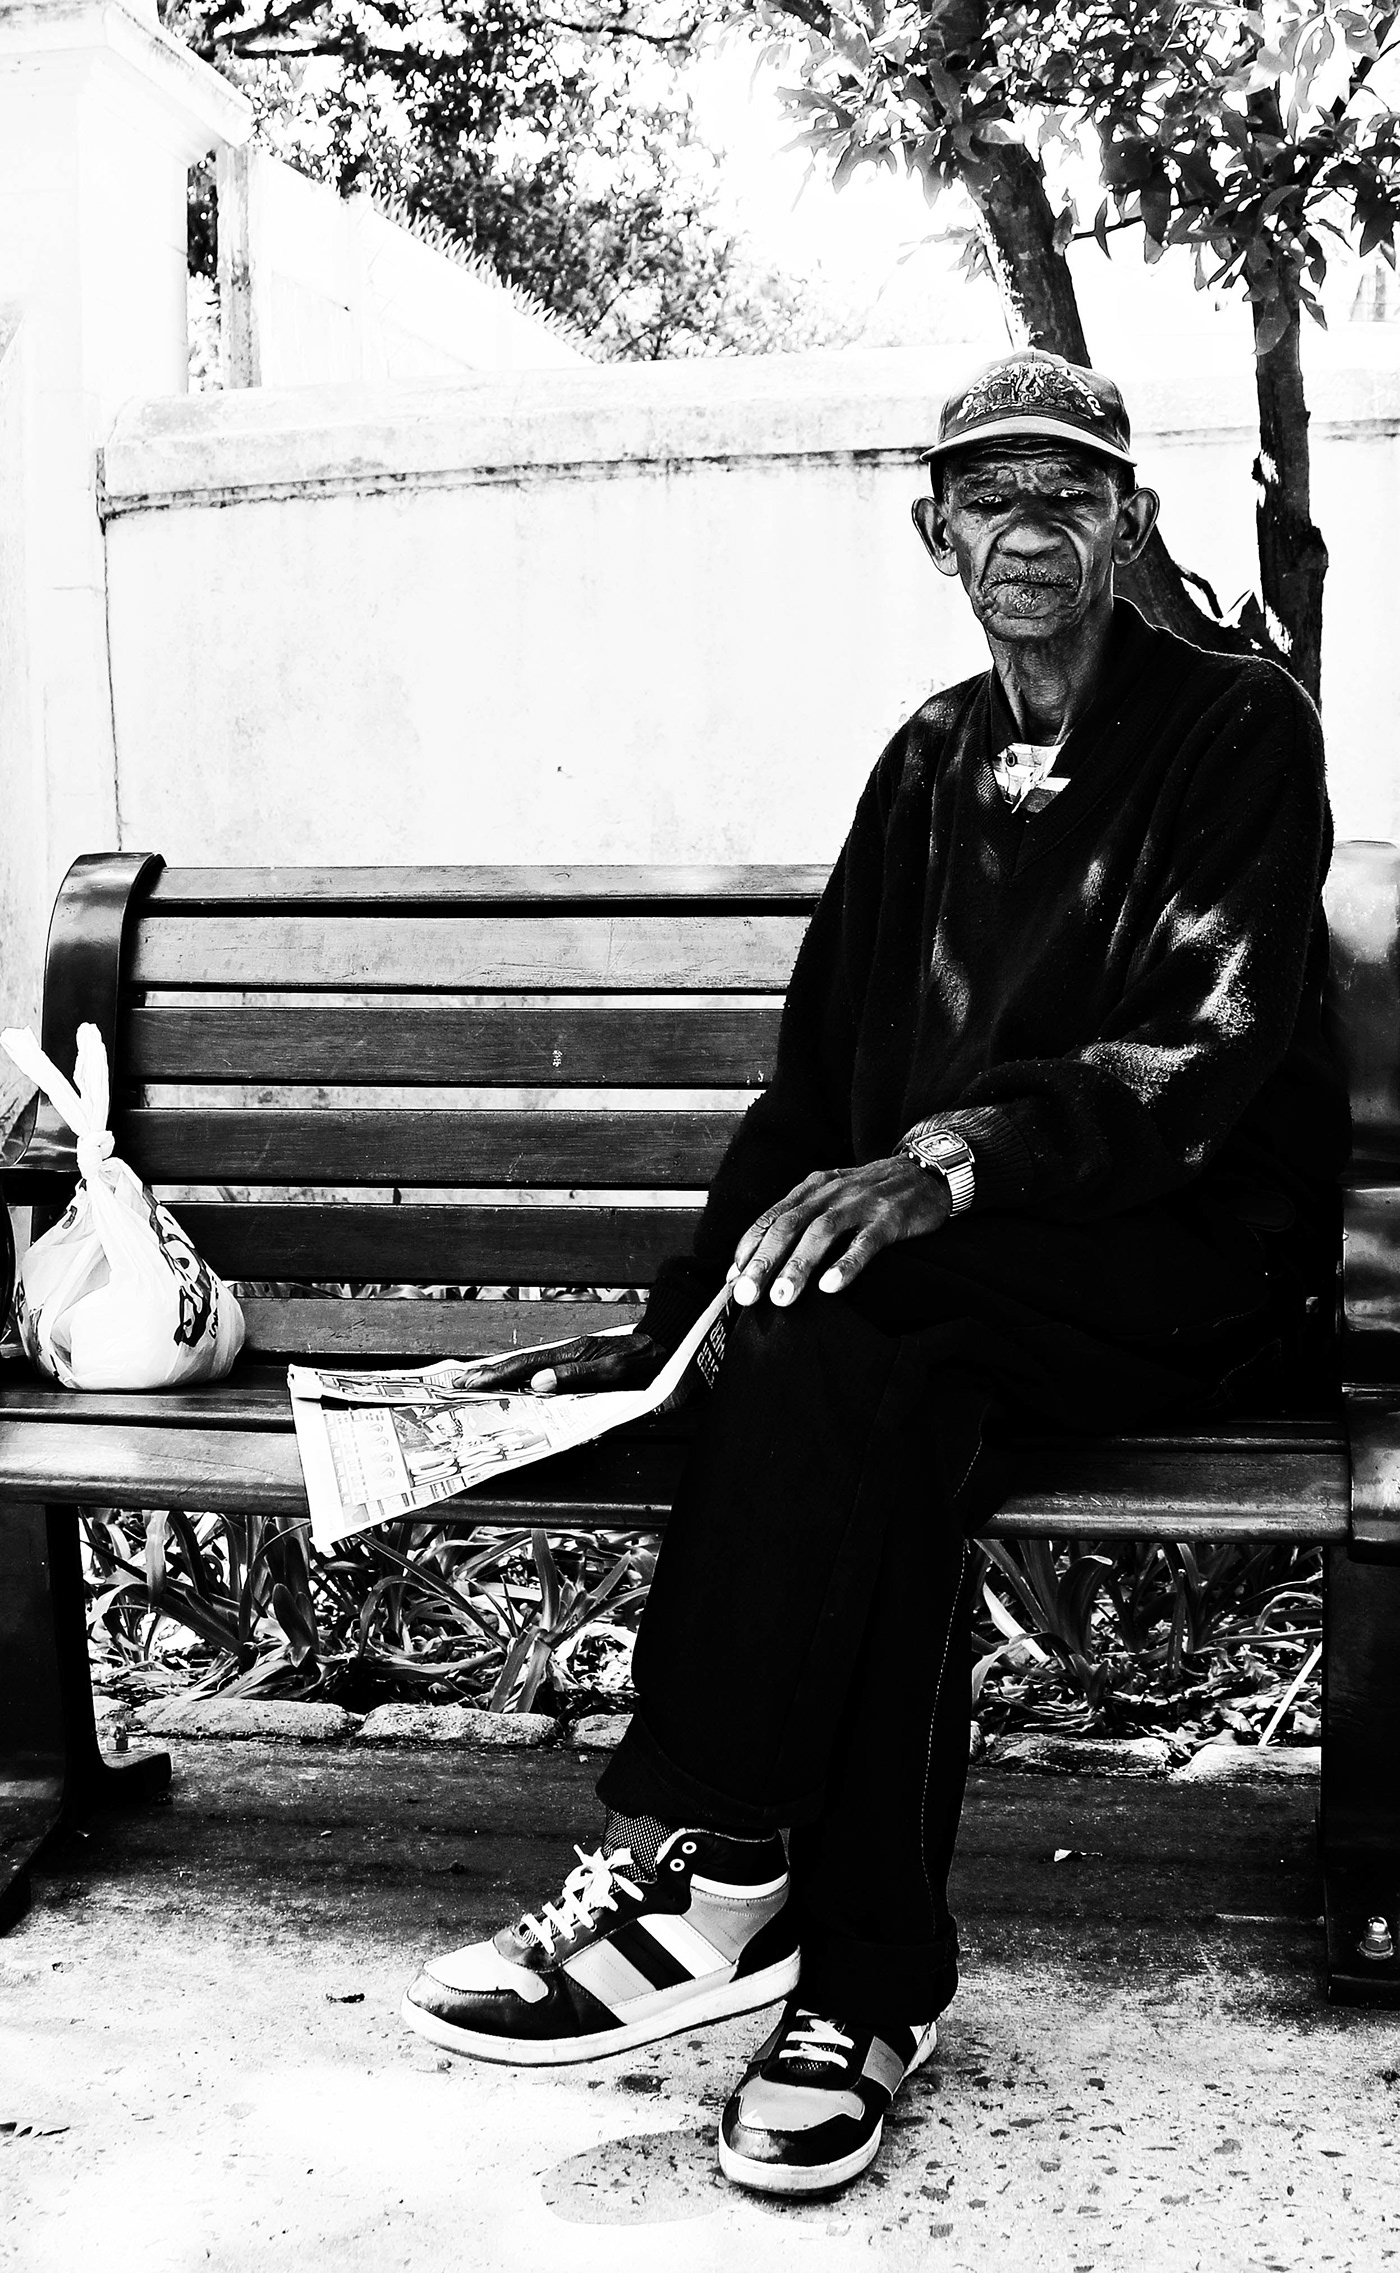 capetown southafrica Documentary  life people ArtDirection Photography  nilsgrubba